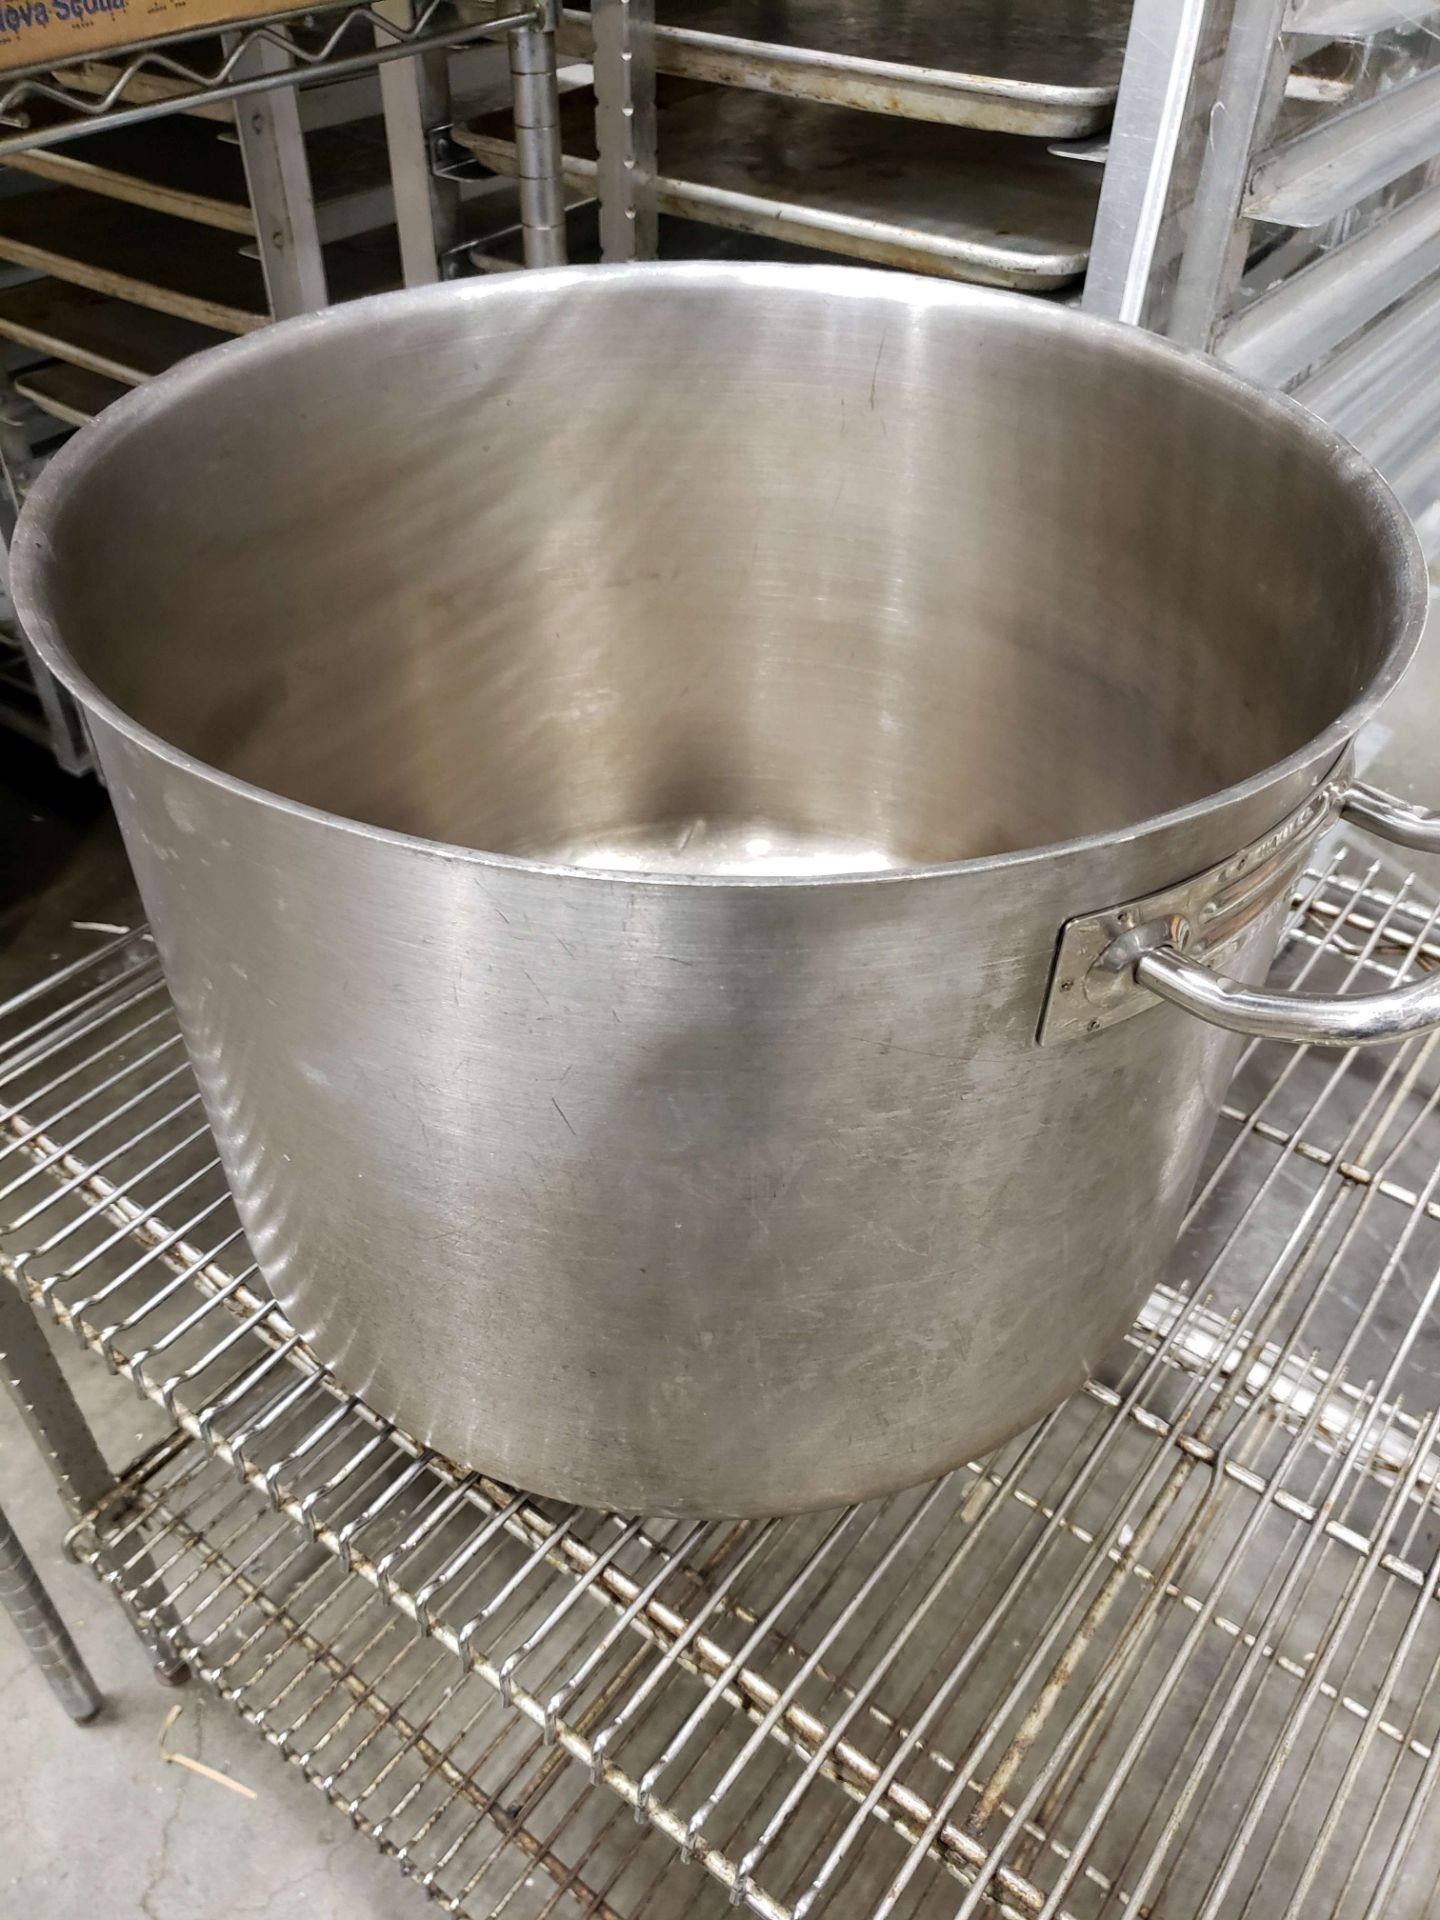 Stainless Stock Pot - Appears to be 32 QT